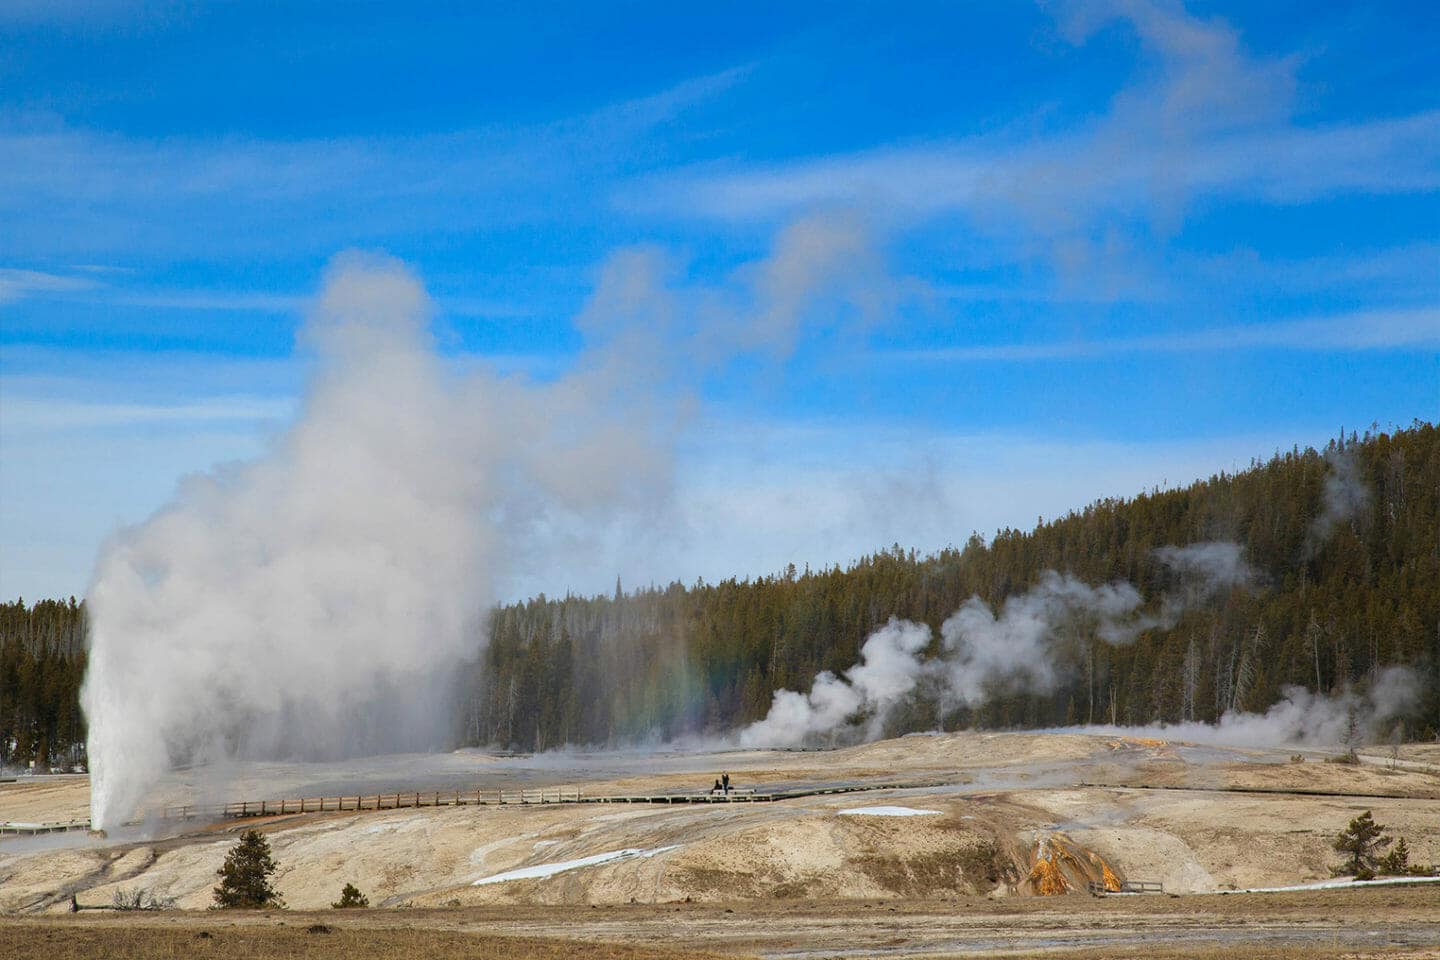 Beehive Geyser Erupts And Shoots Superheated Water And Steam Into The Air At The Upper Geyser Basin In Yellowstone National Park